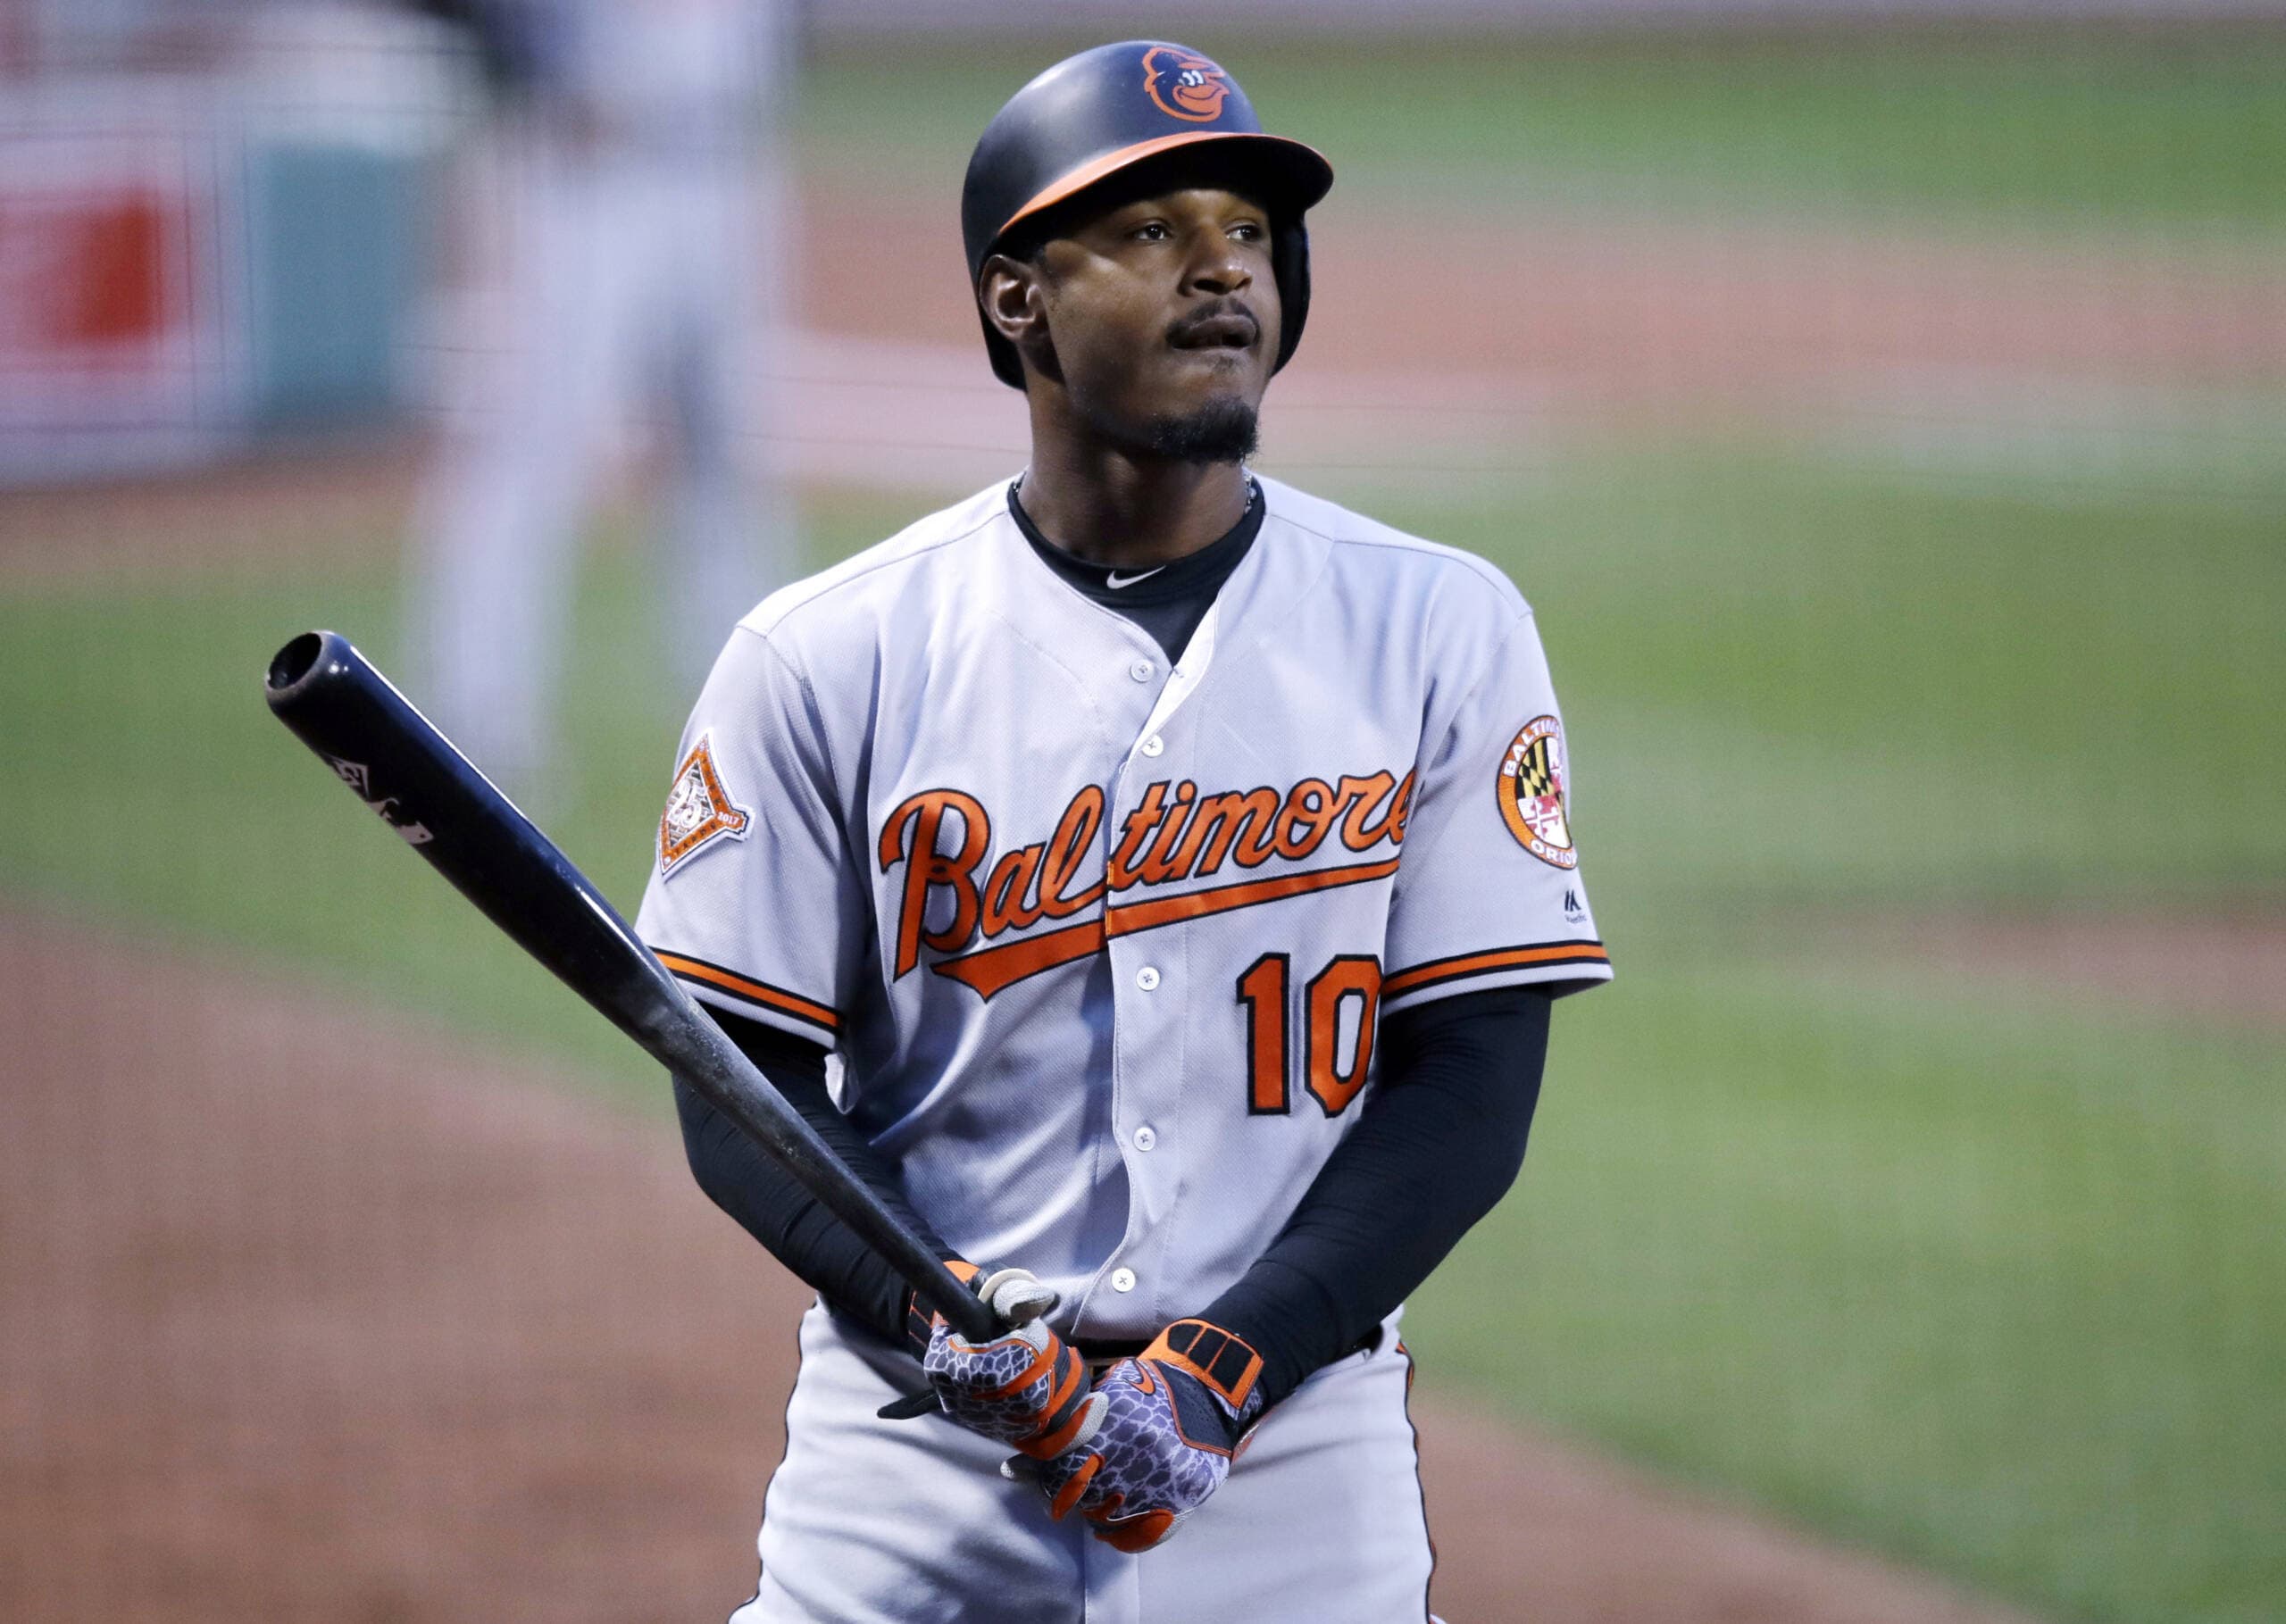 Baltimore Orioles' Adam Jones at a baseball game against the Red Sox at Fenway Park in Boston in 2017. Jones says the widely condemned racial insult hurled at him at there illustrates the need for dialogue about race and for fans to hold each other accountable. (Charles Krupa/AP)